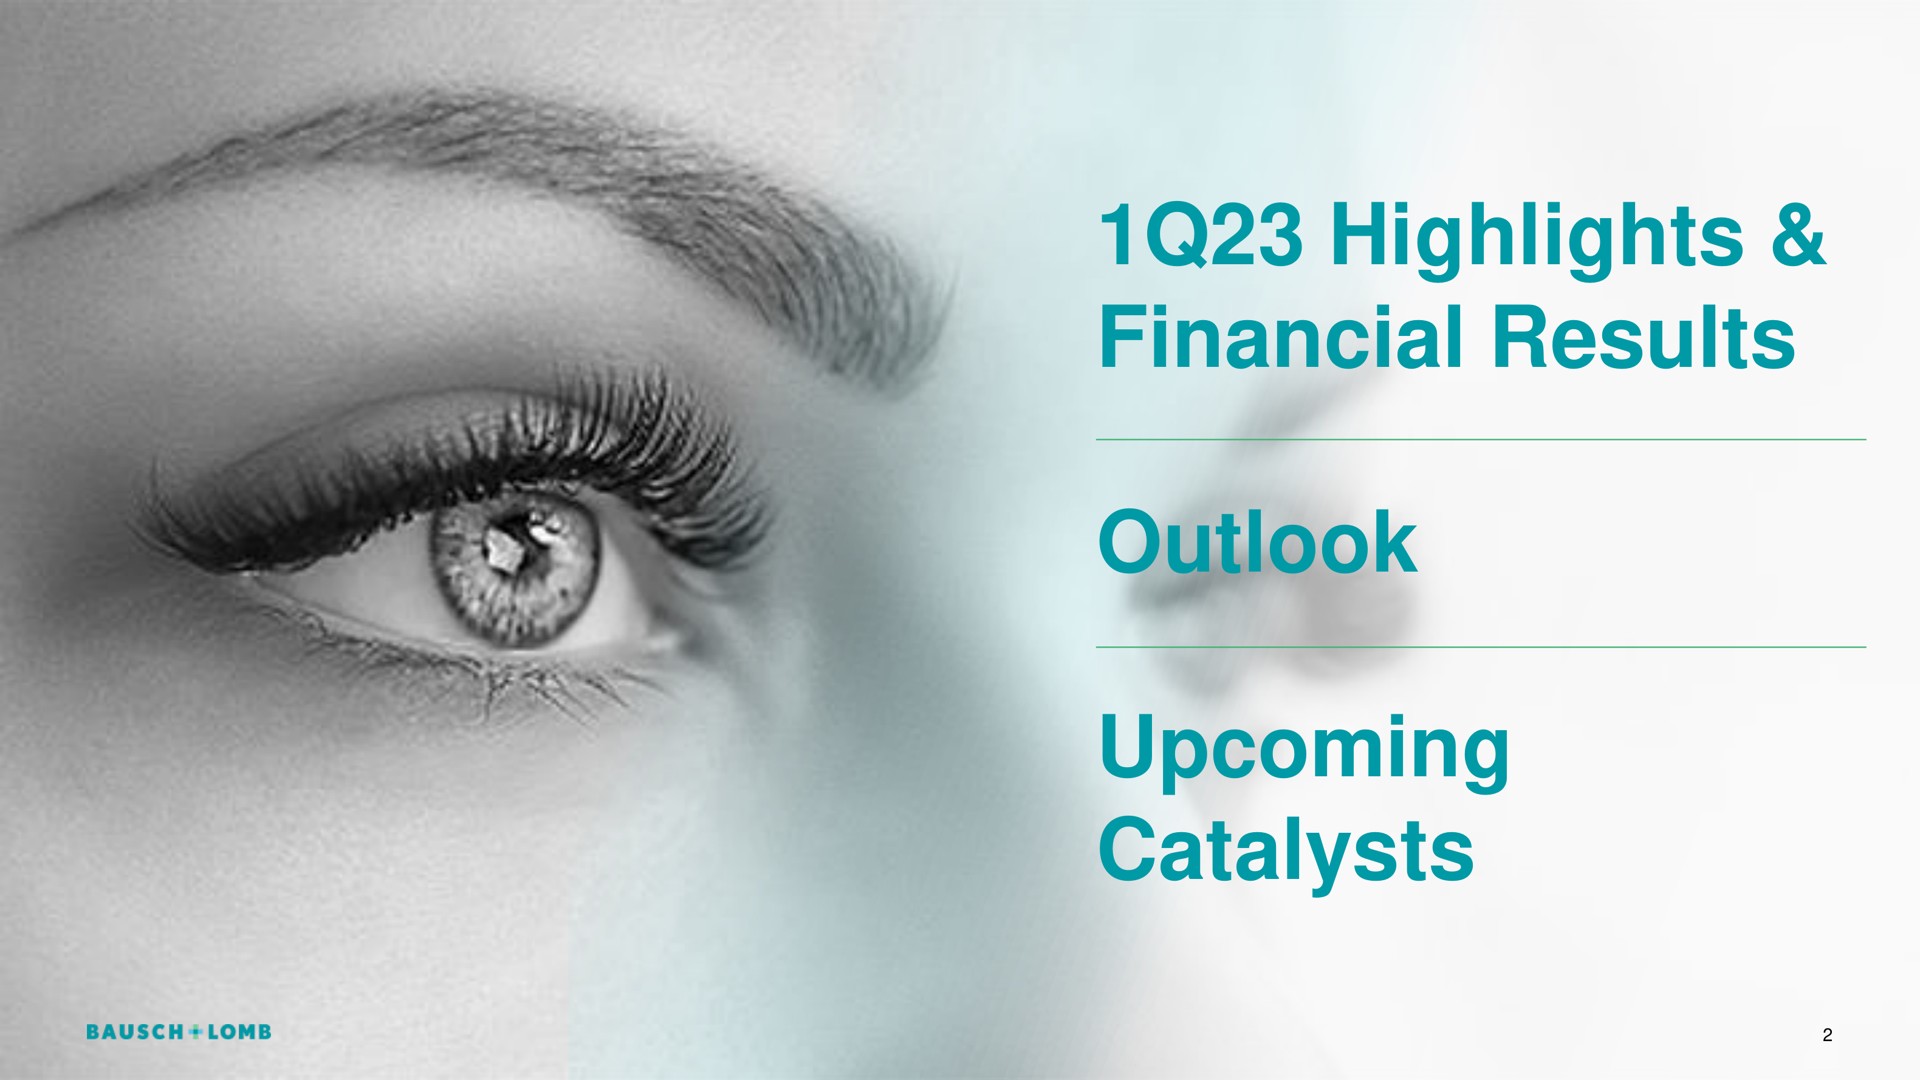 highlights financial results outlook upcoming catalysts | Bausch+Lomb